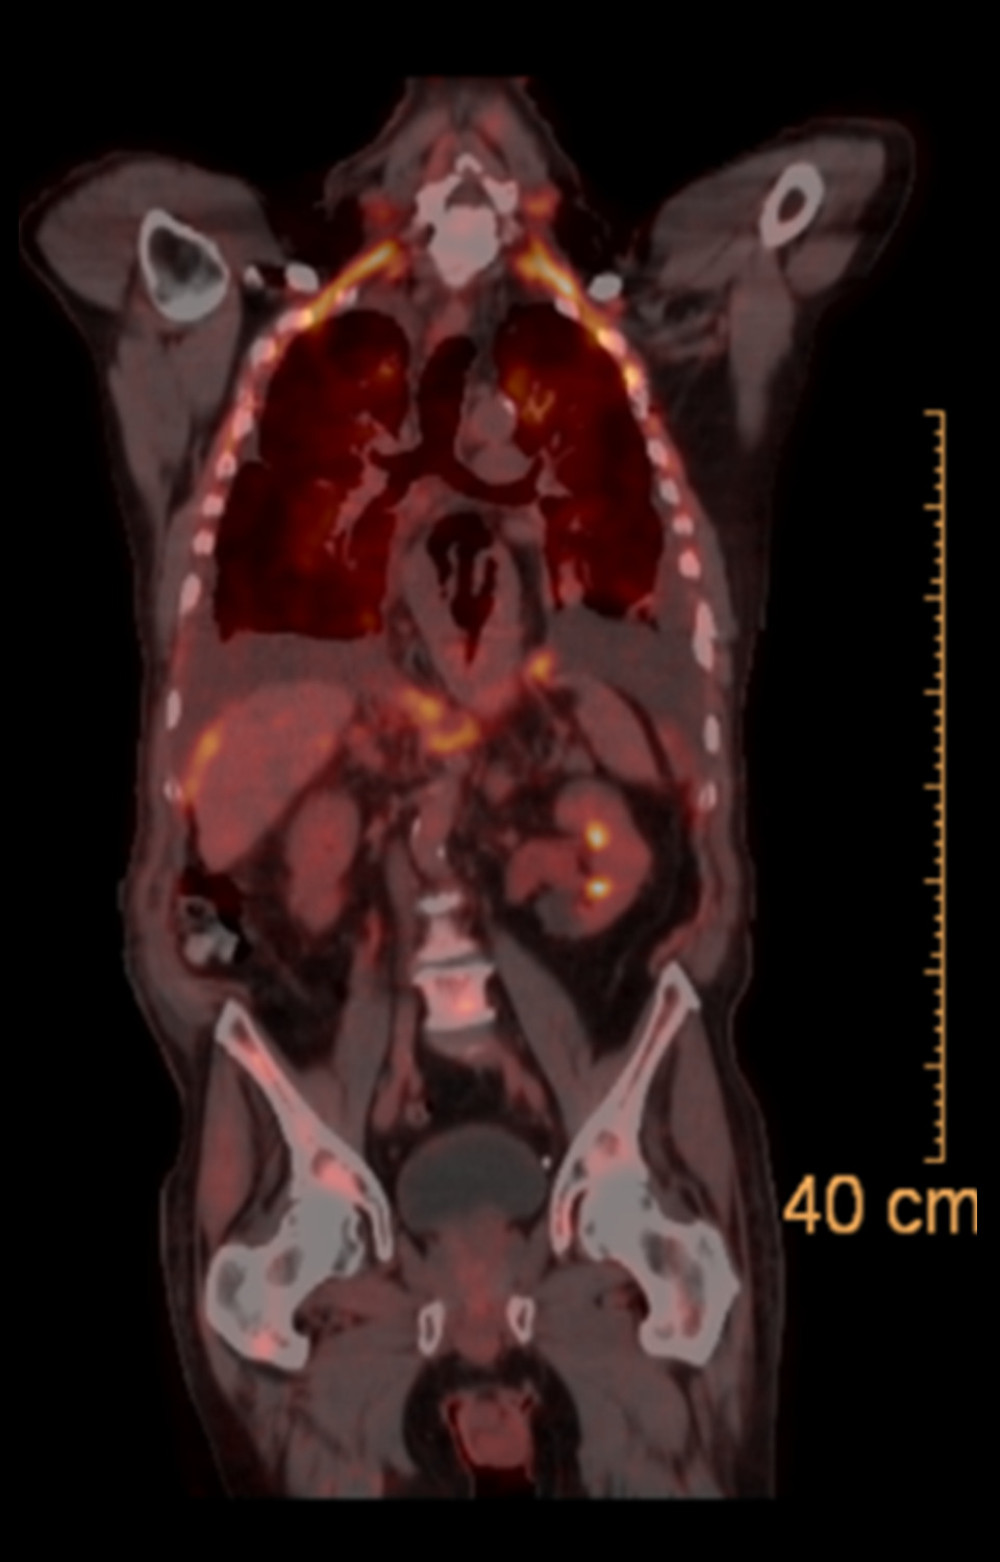 PET/CT scan with increased activity along the right posterior pleural surface, bilateral diaphragmatic surfaces, left posterior acetabular bone, right SI joint, S2 segment of the sacrum, and the spine between T11 and L5. Notably, no increased activity is seen in the stomach or duodenum.